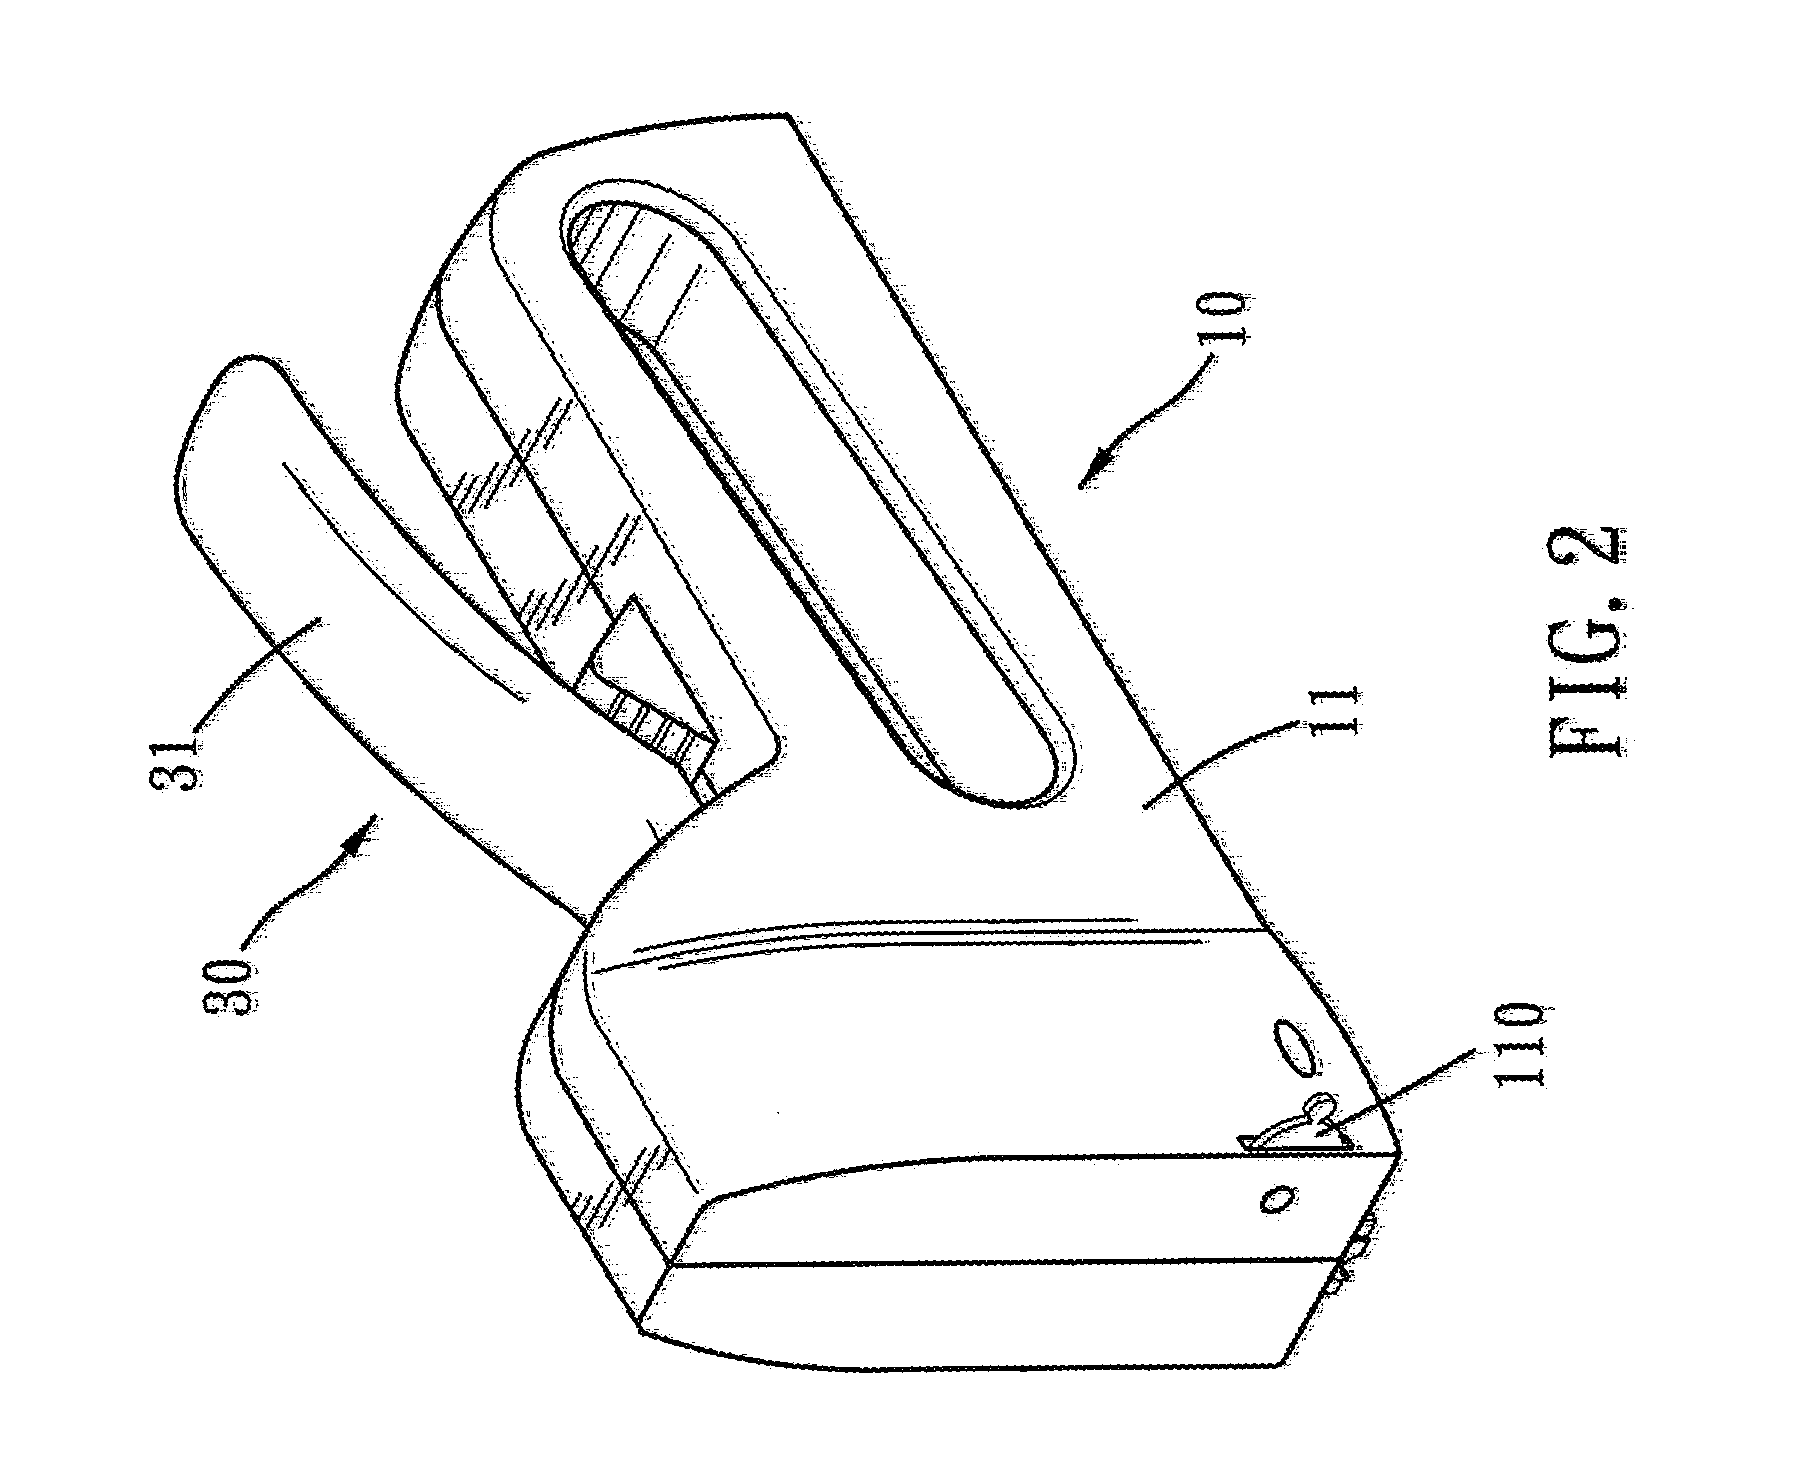 Nailing device adapted for nail units of different sizes